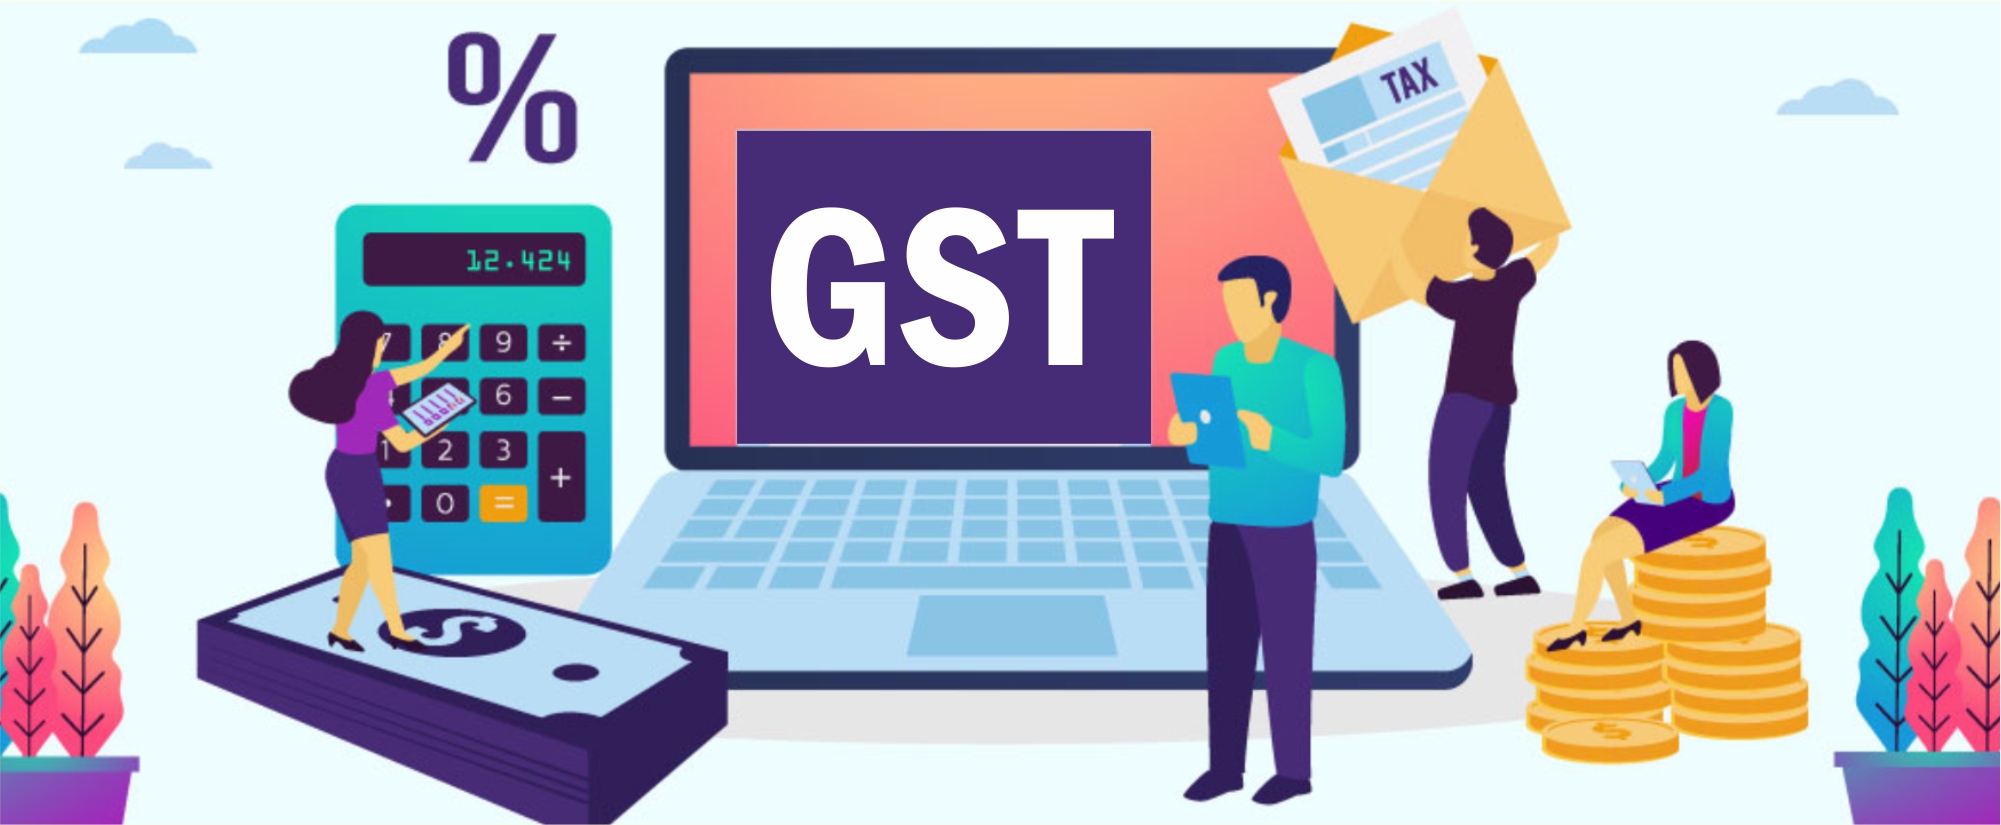 New GST rates are implemented_AMF NEWS